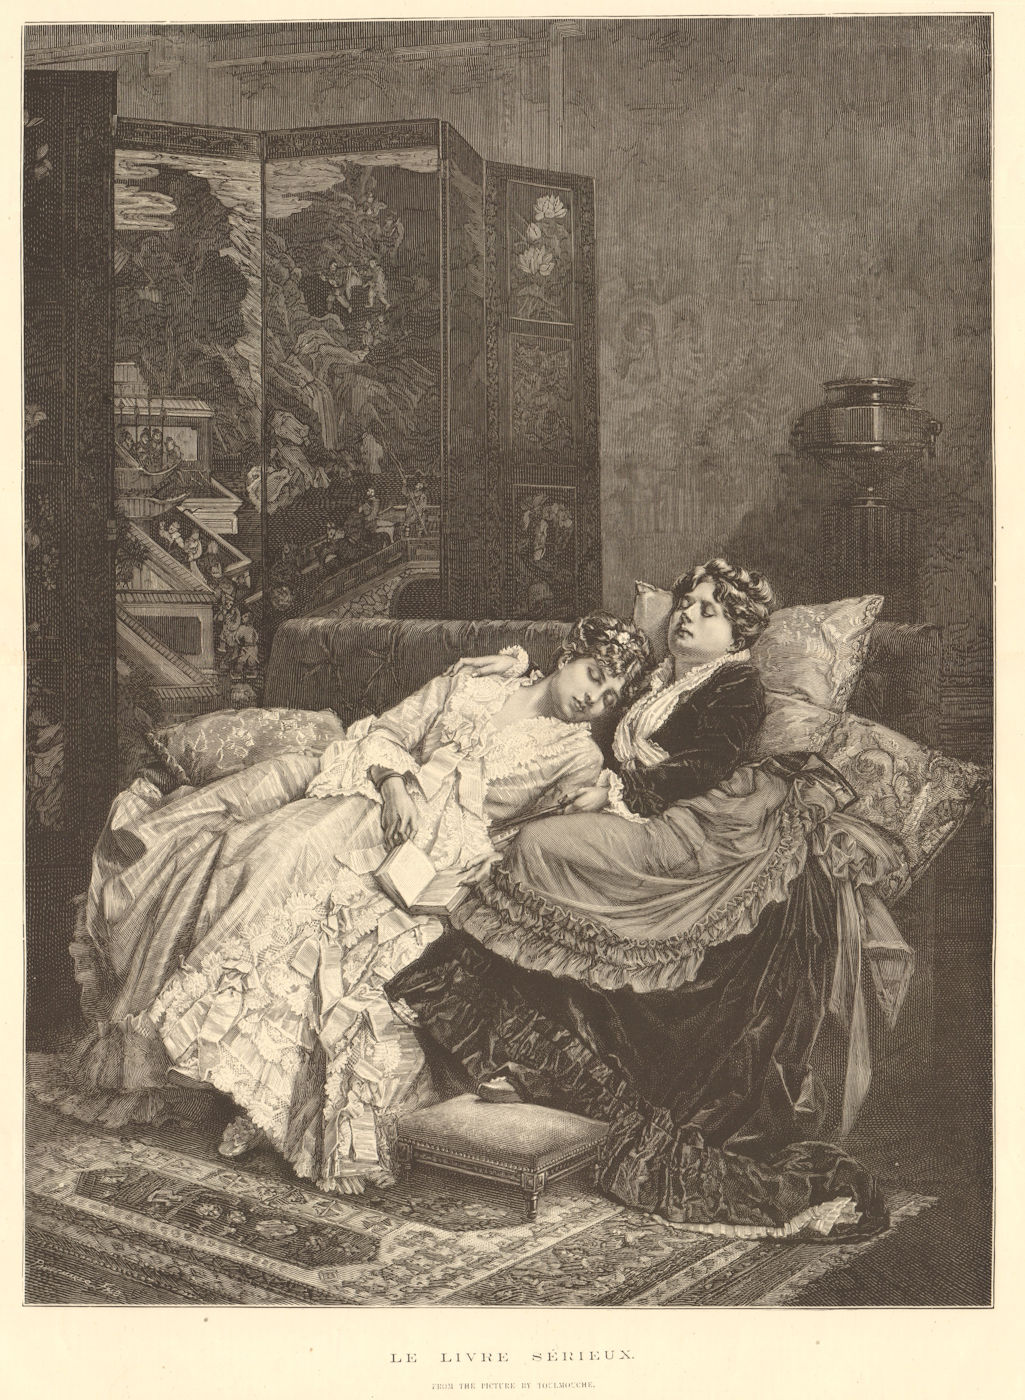 Associate Product Le livre serieux, by Toulmouche. Asleep reading book 1874 ILN full page print